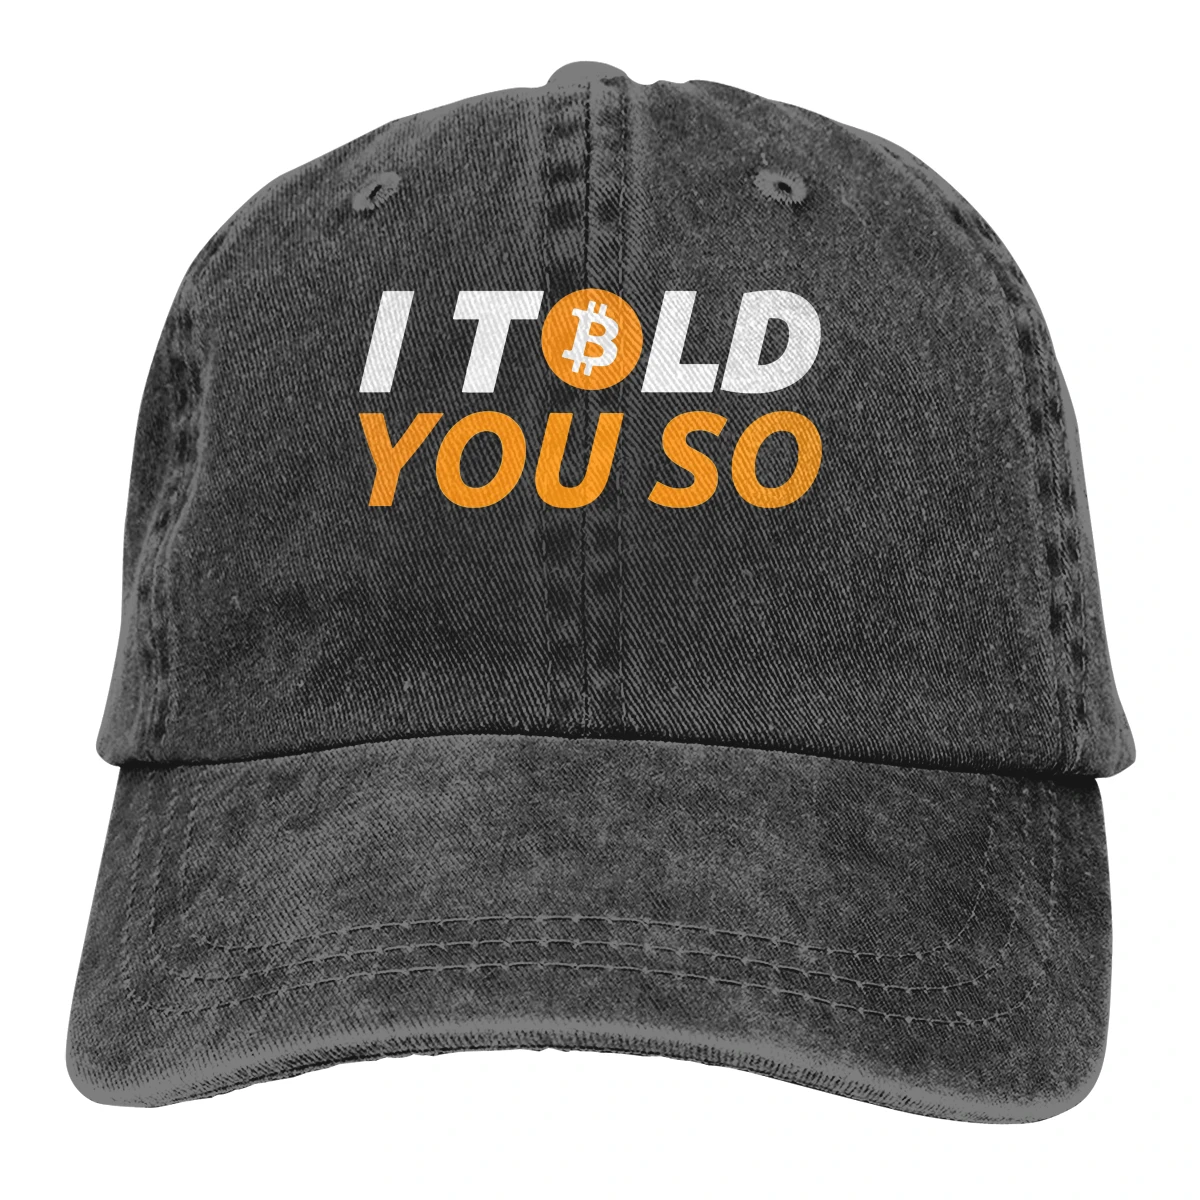 

Summer Cap Sun Visor I Told You So Hip Hop Caps Bitcoin Cryptocurrency Miners Meme Cowboy Hat Peaked Hats